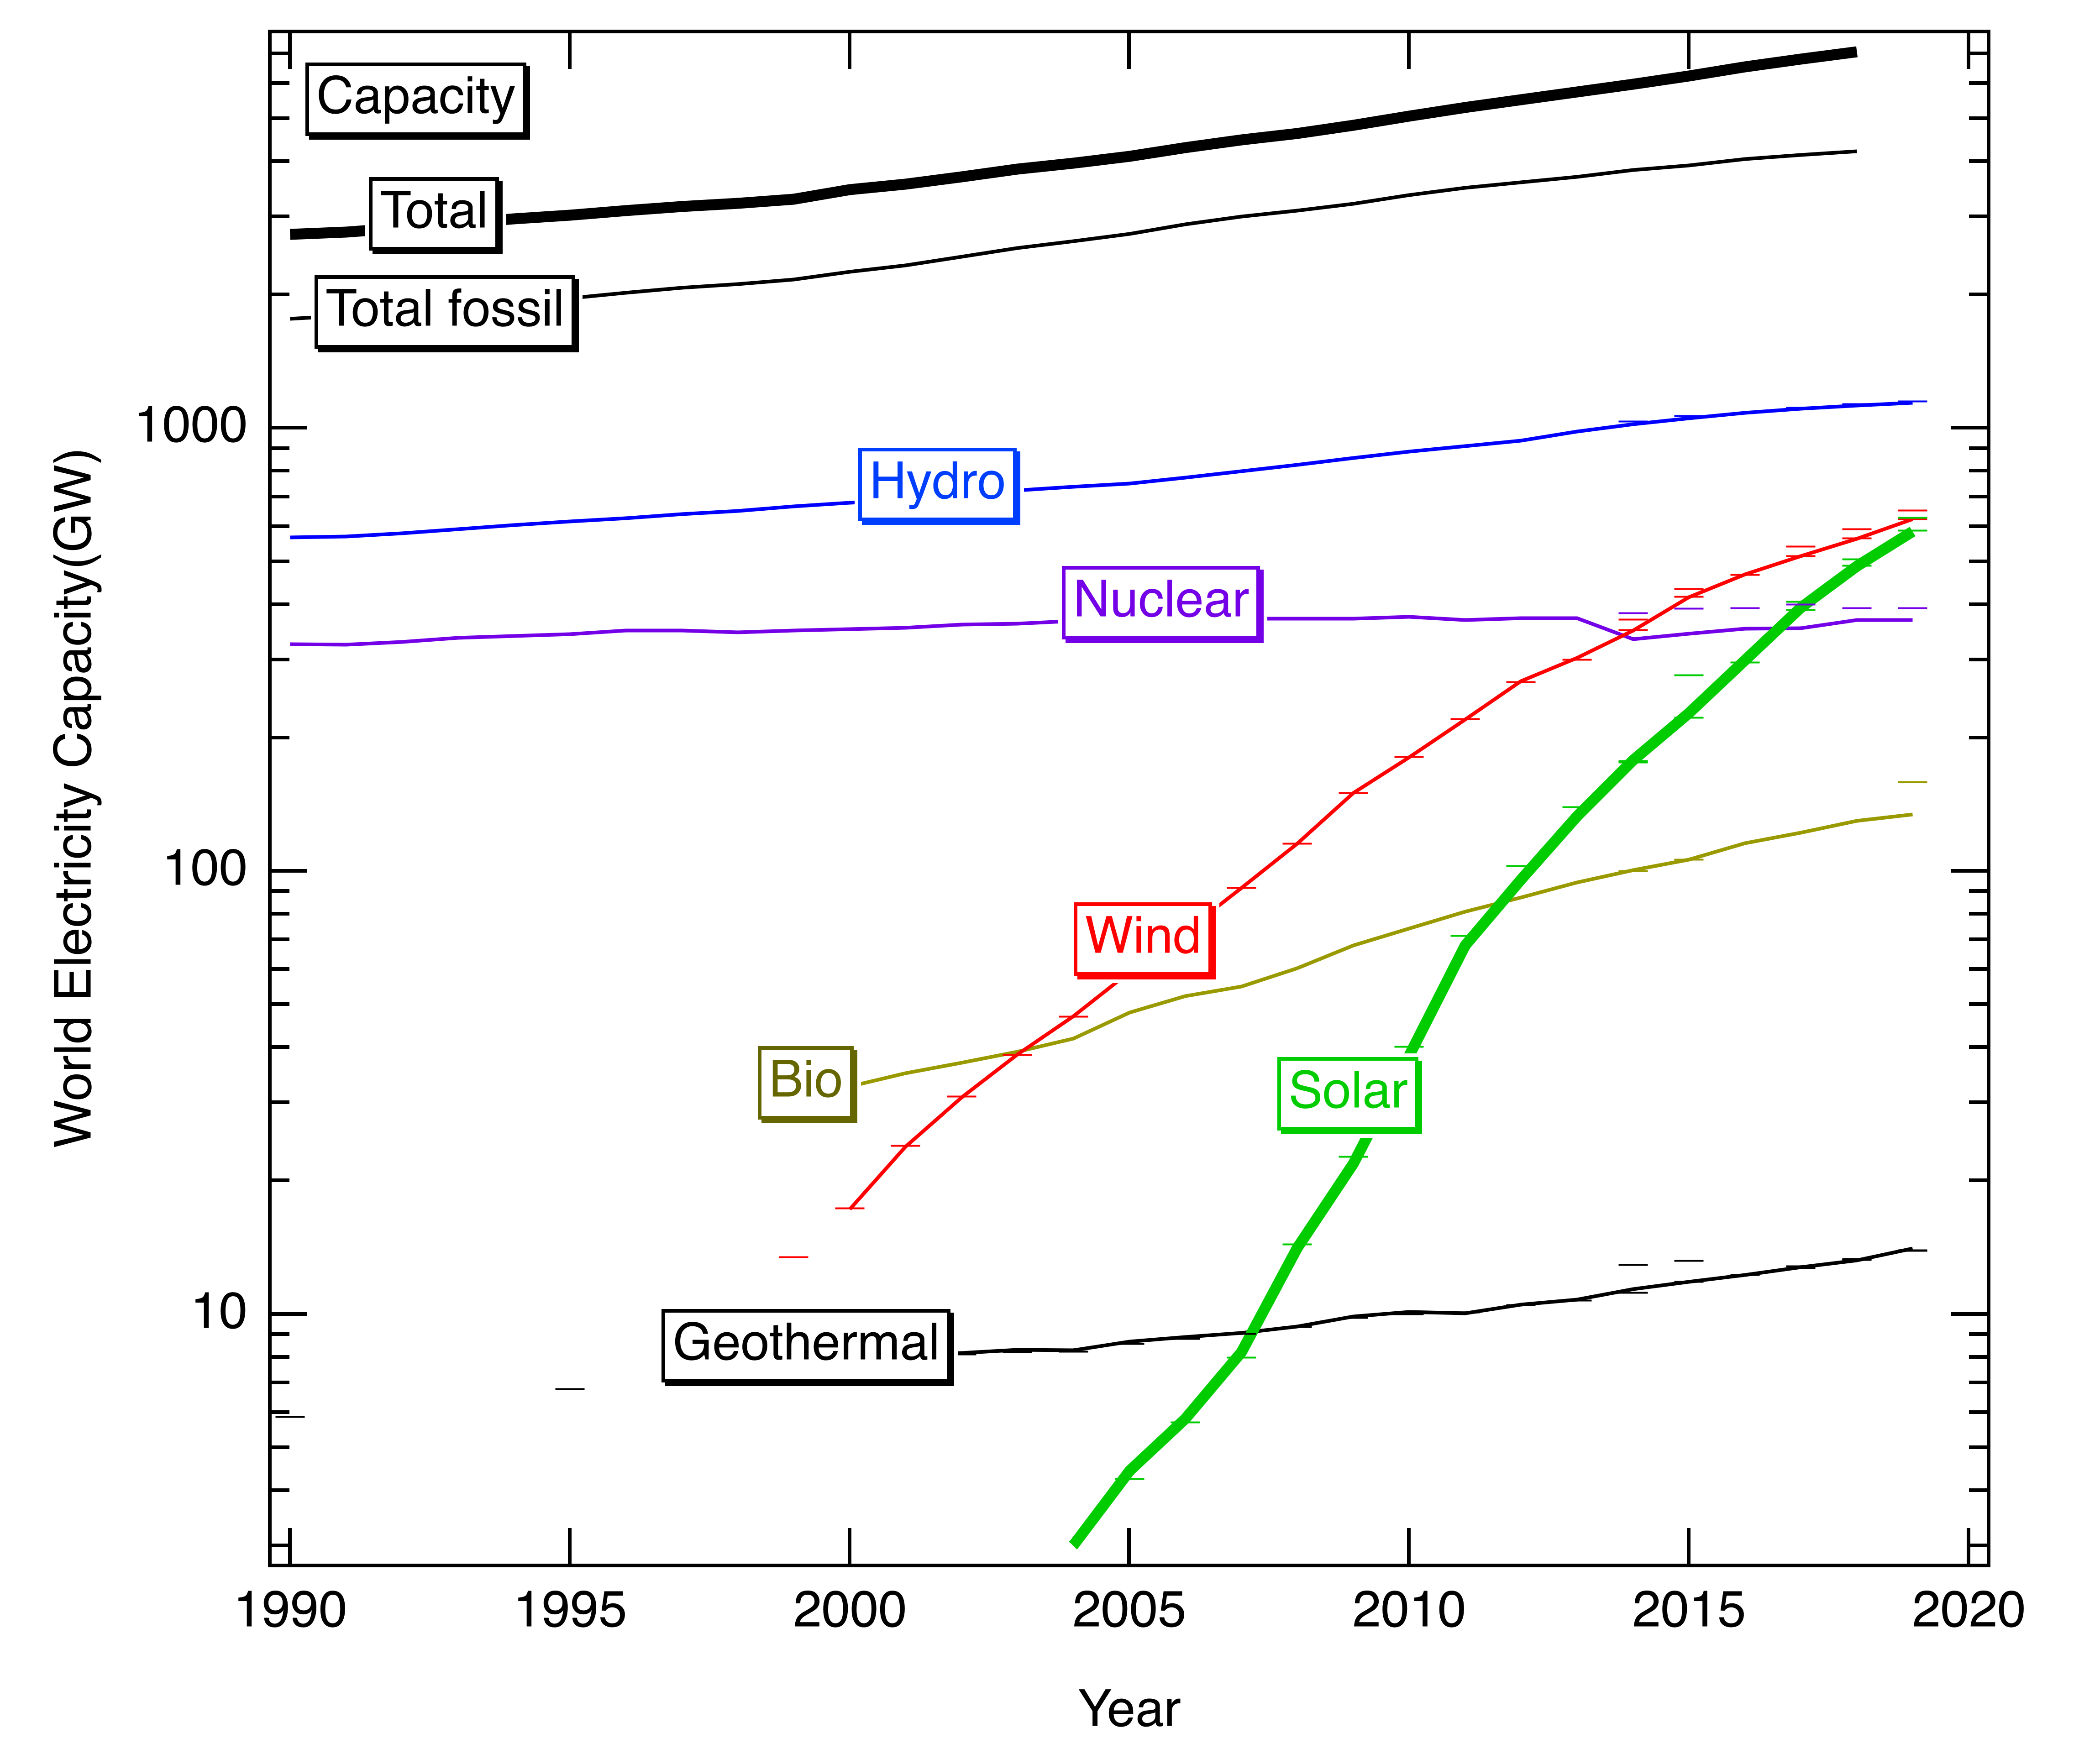 Plot of world electric generation capacity by year